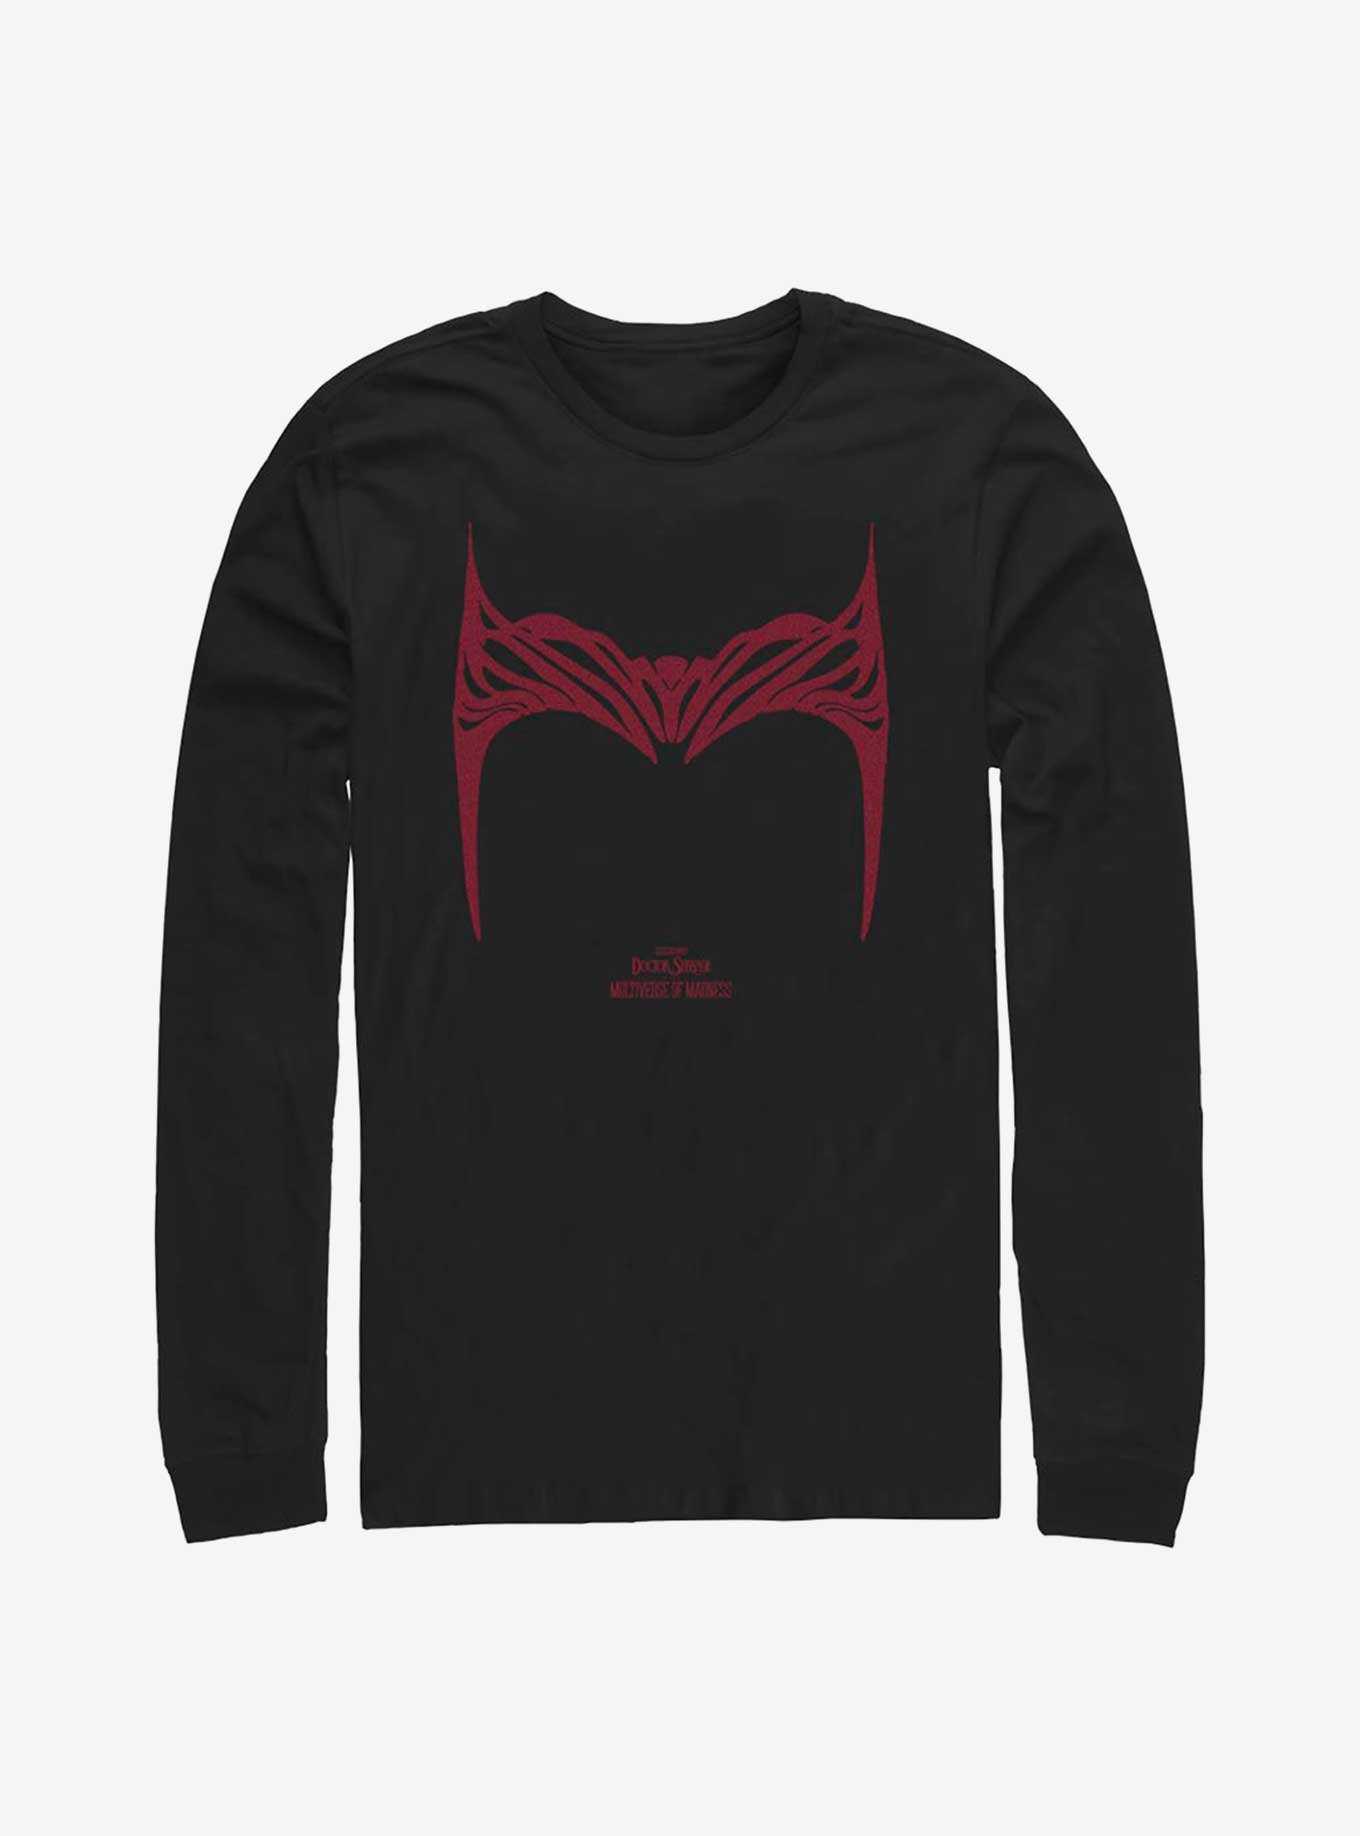 Marvel Doctor Strange In The Multiverse of Madness Wanda Helm Long-Sleeve T-Shirt, , hi-res